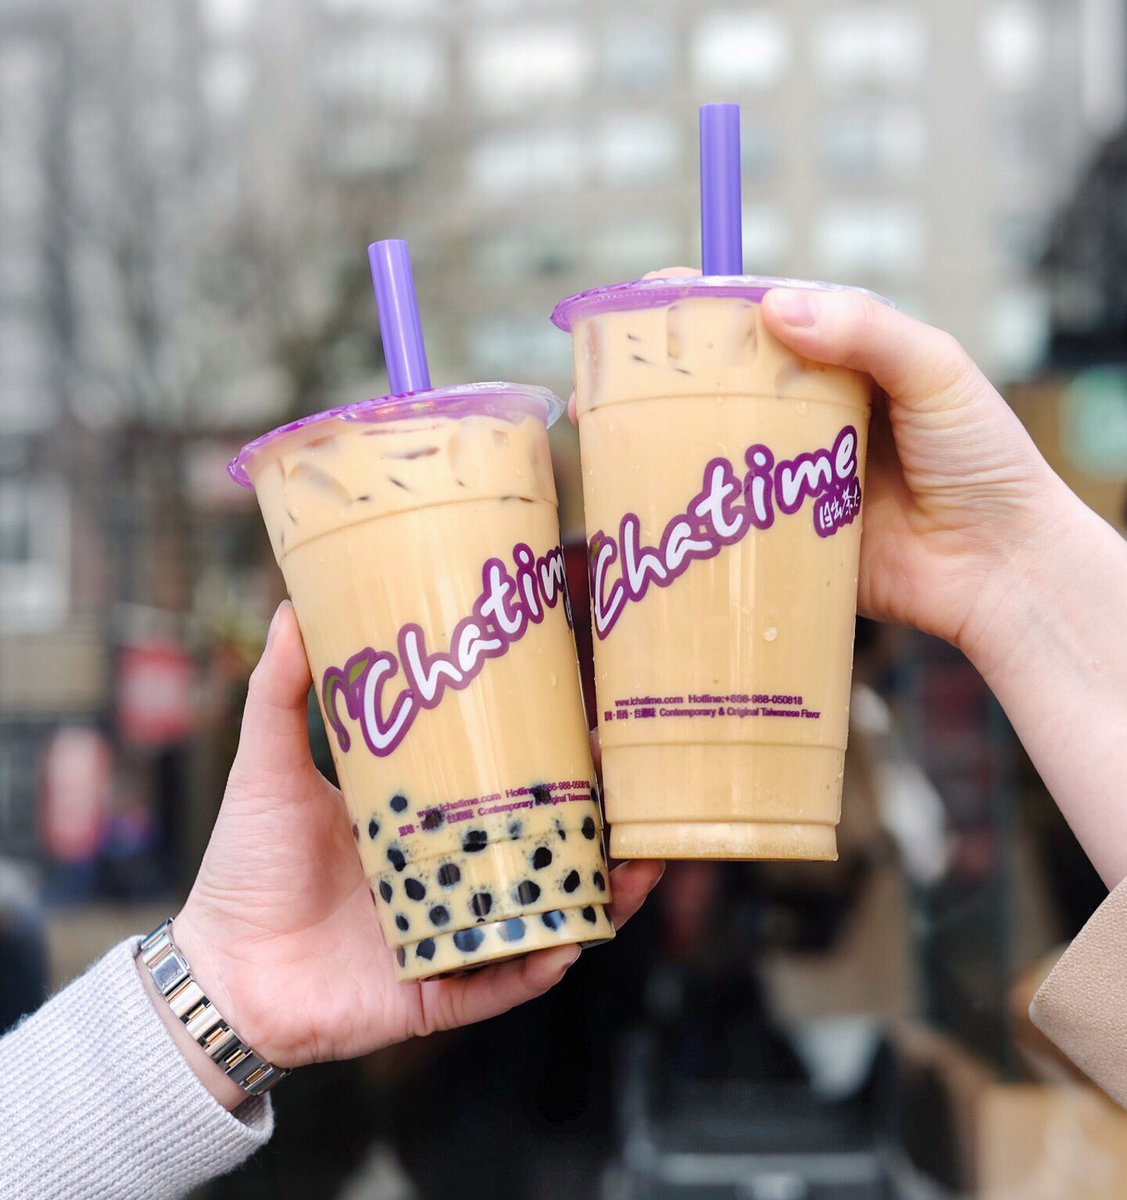 Chatime Canada 日出茶太 - 3 drinks in 1?? The debut of our